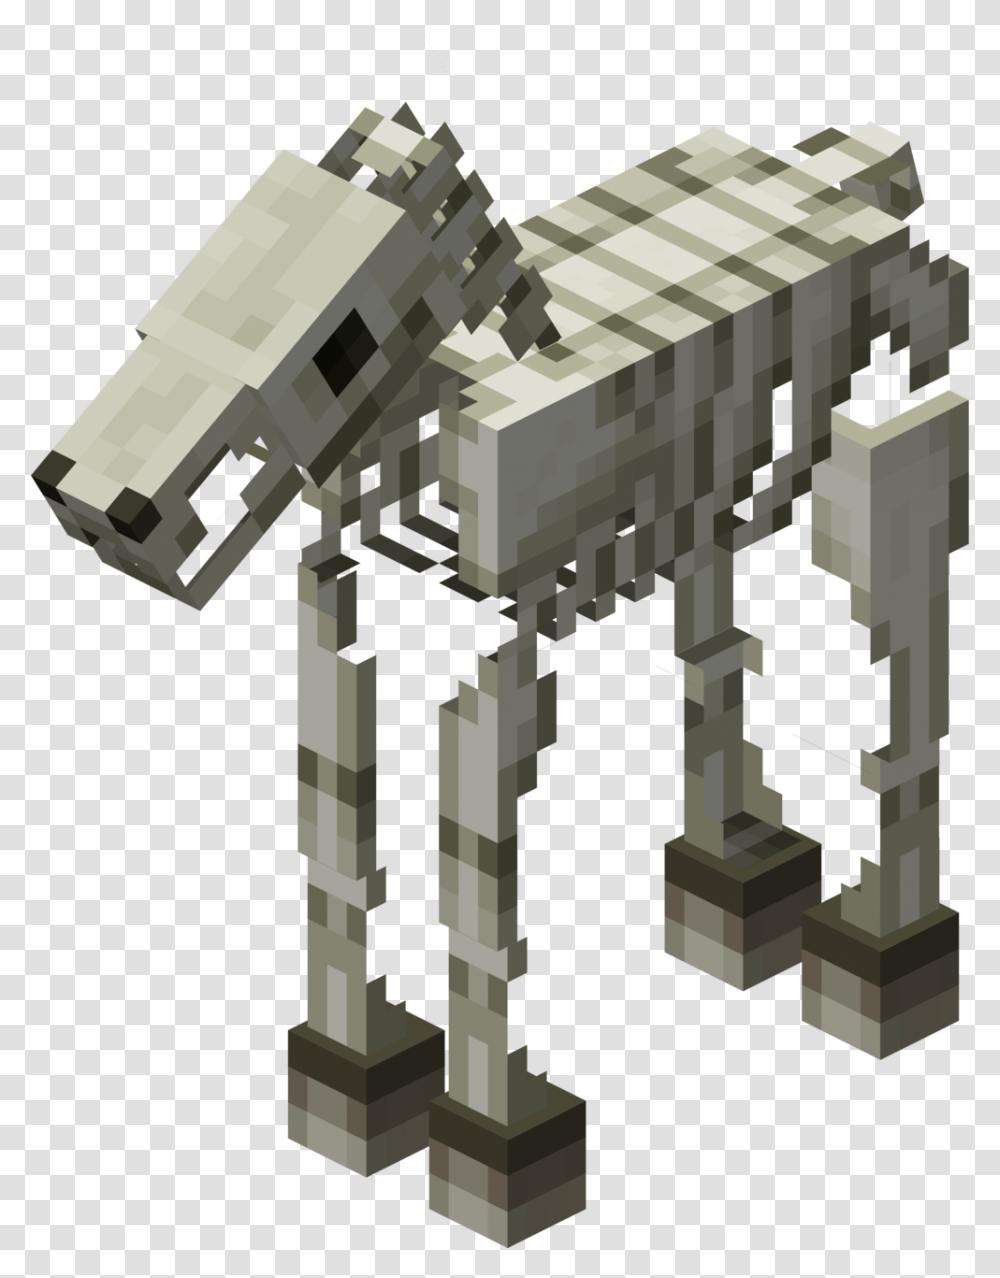 Zombie And Skeleton Horse Minecraft Download, Toy, Building, Architecture, Pillar Transparent Png